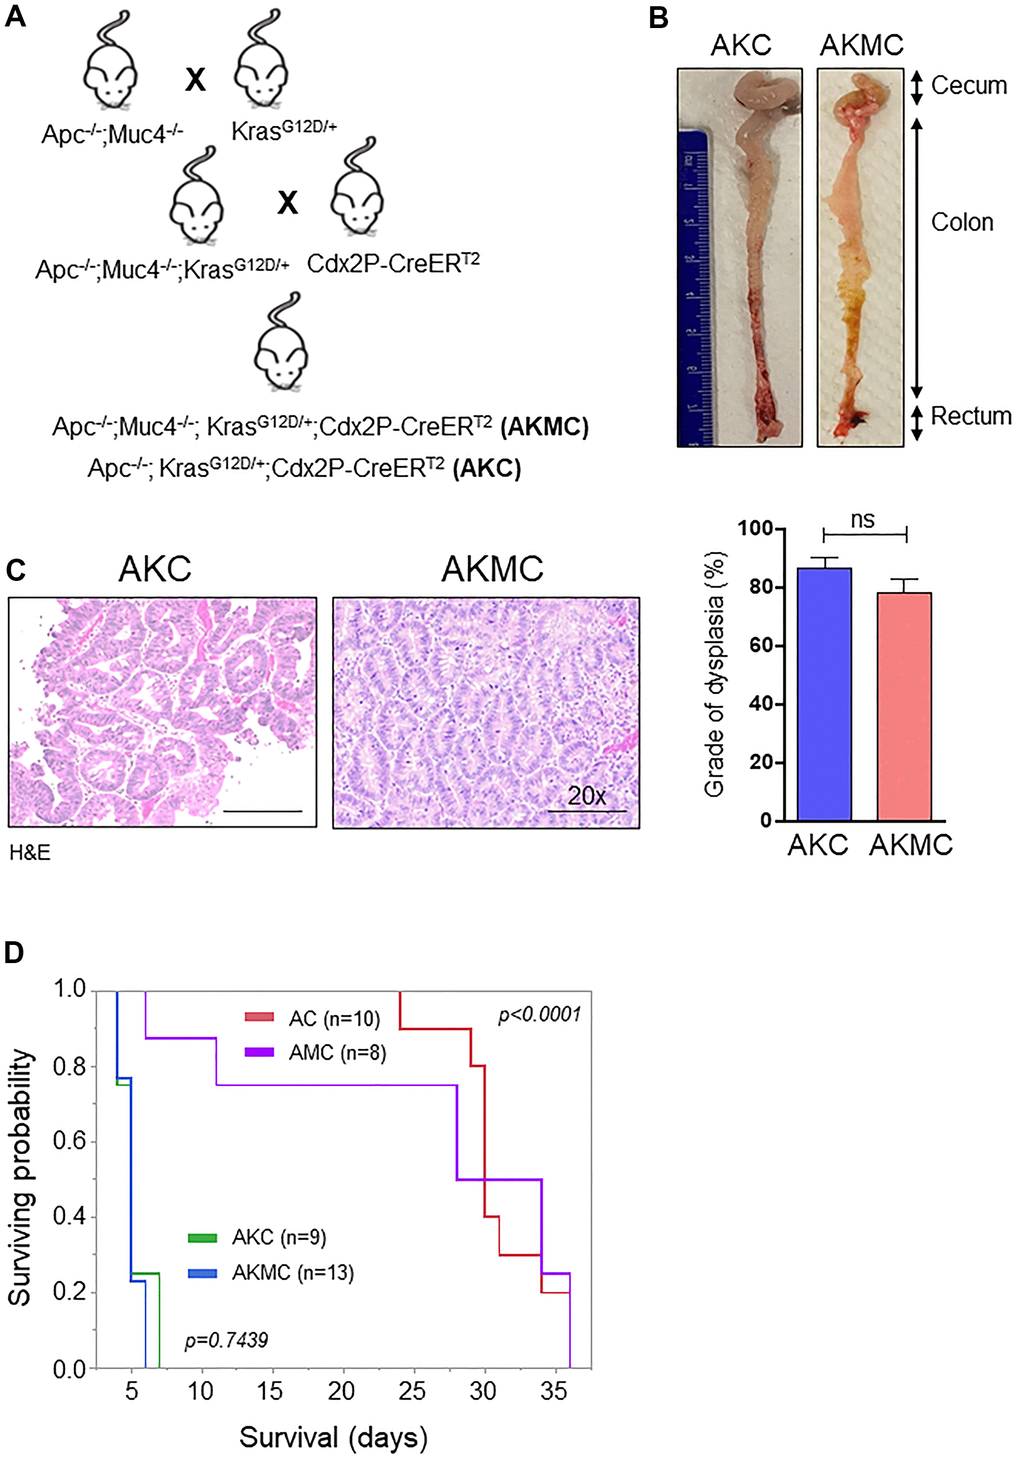 Additional Kras mutation aggravates Apc tumors and reduces survival. (A) Breeding strategy for generation of genetically engineered mice model for Muc4-/- by crossing with Apcflox/flox and KrasG12D mutant mice. First-generation of Apc-/-;Muc4-/-;KrasG12D/+ animals were further crossed with inducible colon specific Cre (Cdx2P-Cre ERT2) mice to get final cross (Apc-/-;Muc4-/-; KrasG12D/+;Cdx2P-CreERT2, AKMC) and its littermate controls (Apc-/-;KrasG12D/+;Cdx2P-CreERT2, AKC). (B) Representative images of the colon in AKC and AKMC animals. (C) H&E images showed a grade of dysplasia in AKC and AKMC mice. n = 3 for AKC and n=6 for AKMC group. (D) Overall survival curves of different mouse models used in the present study. ns = non-significant.